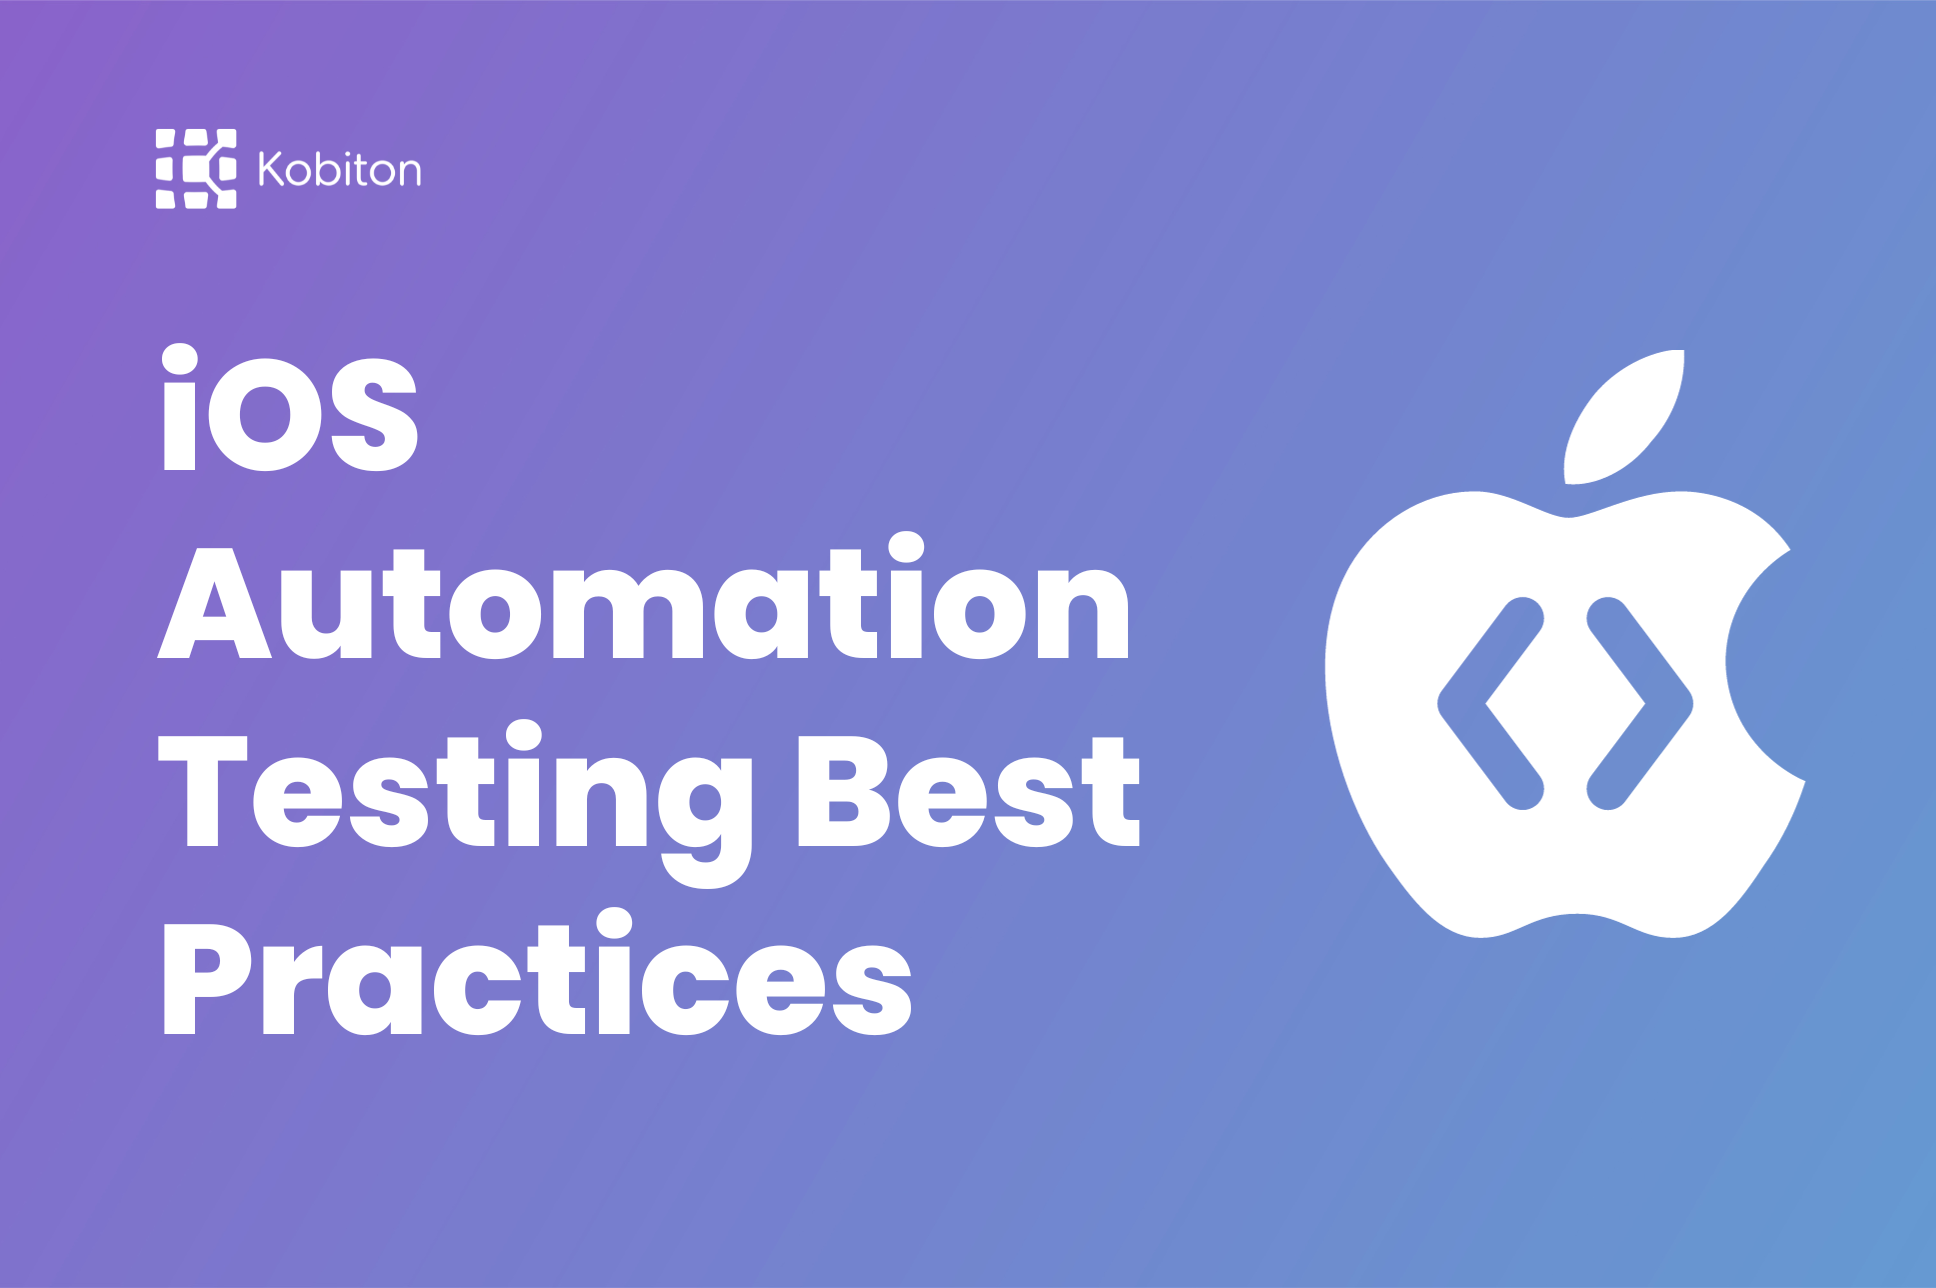 iOS Automation Testing Best Practices